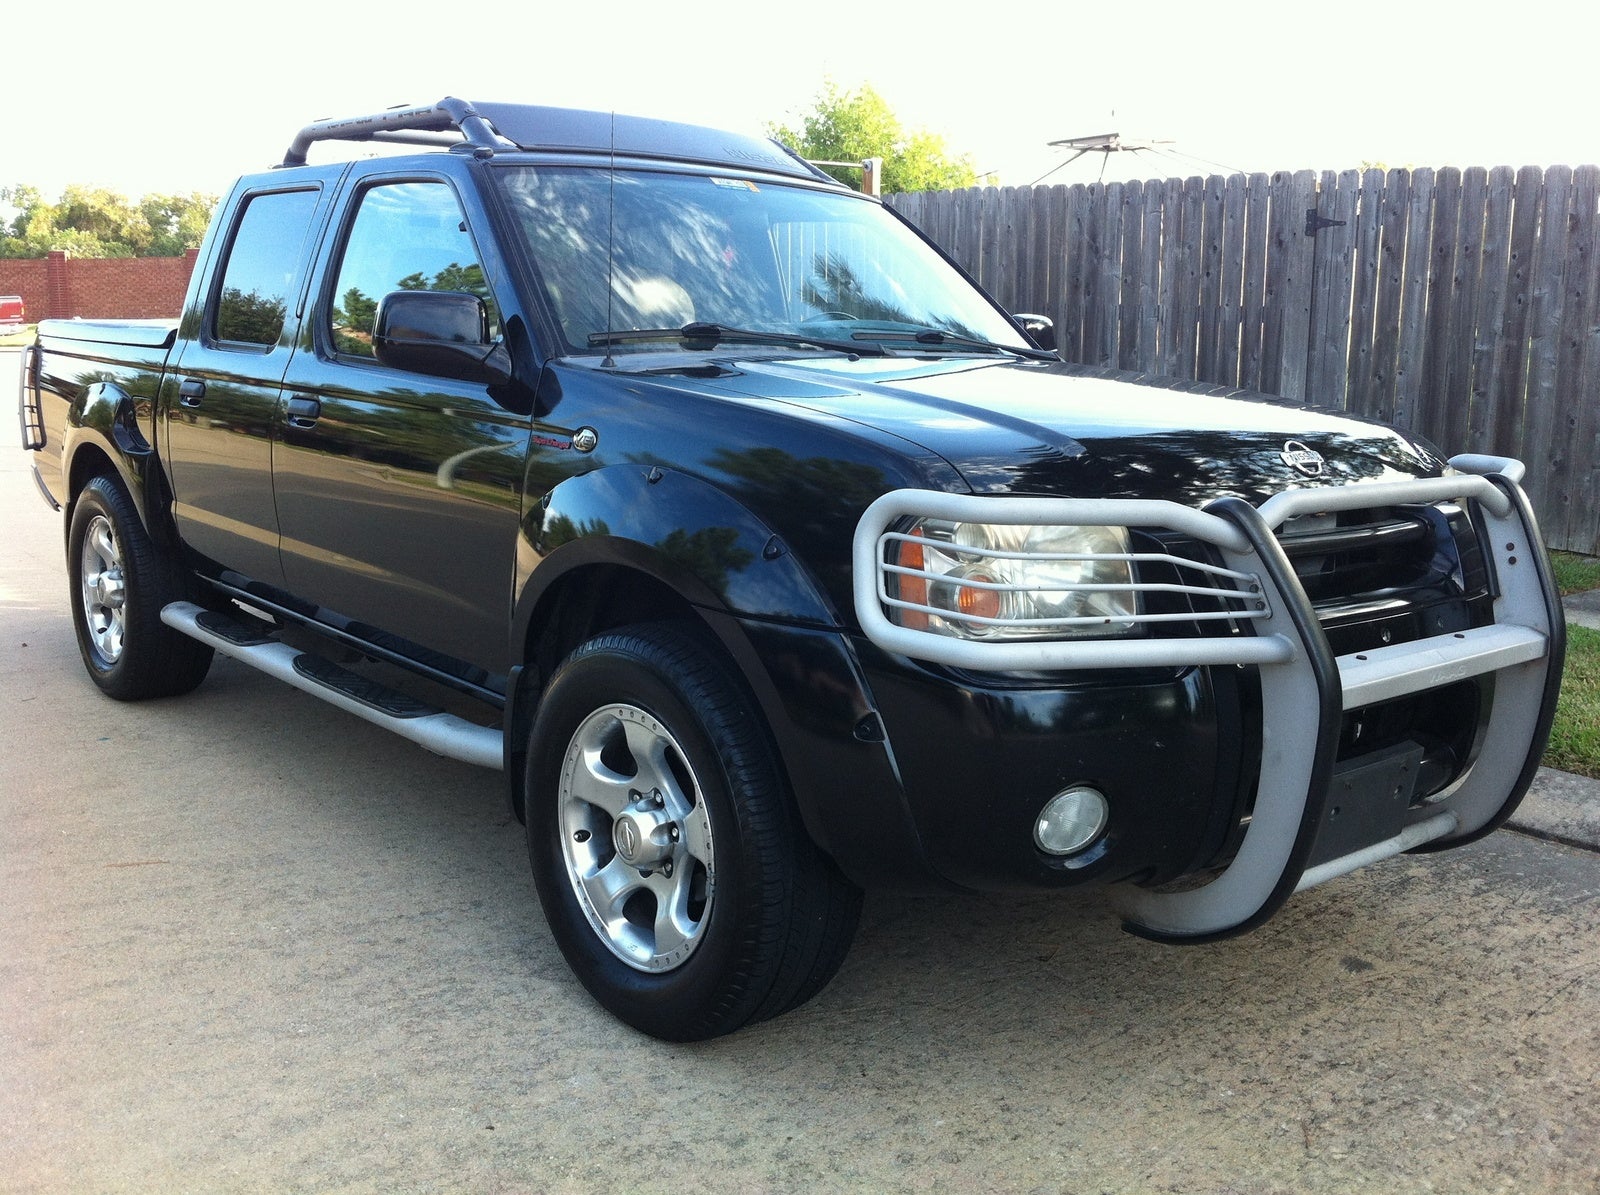 2001 Nissan frontier supercharged specs #9